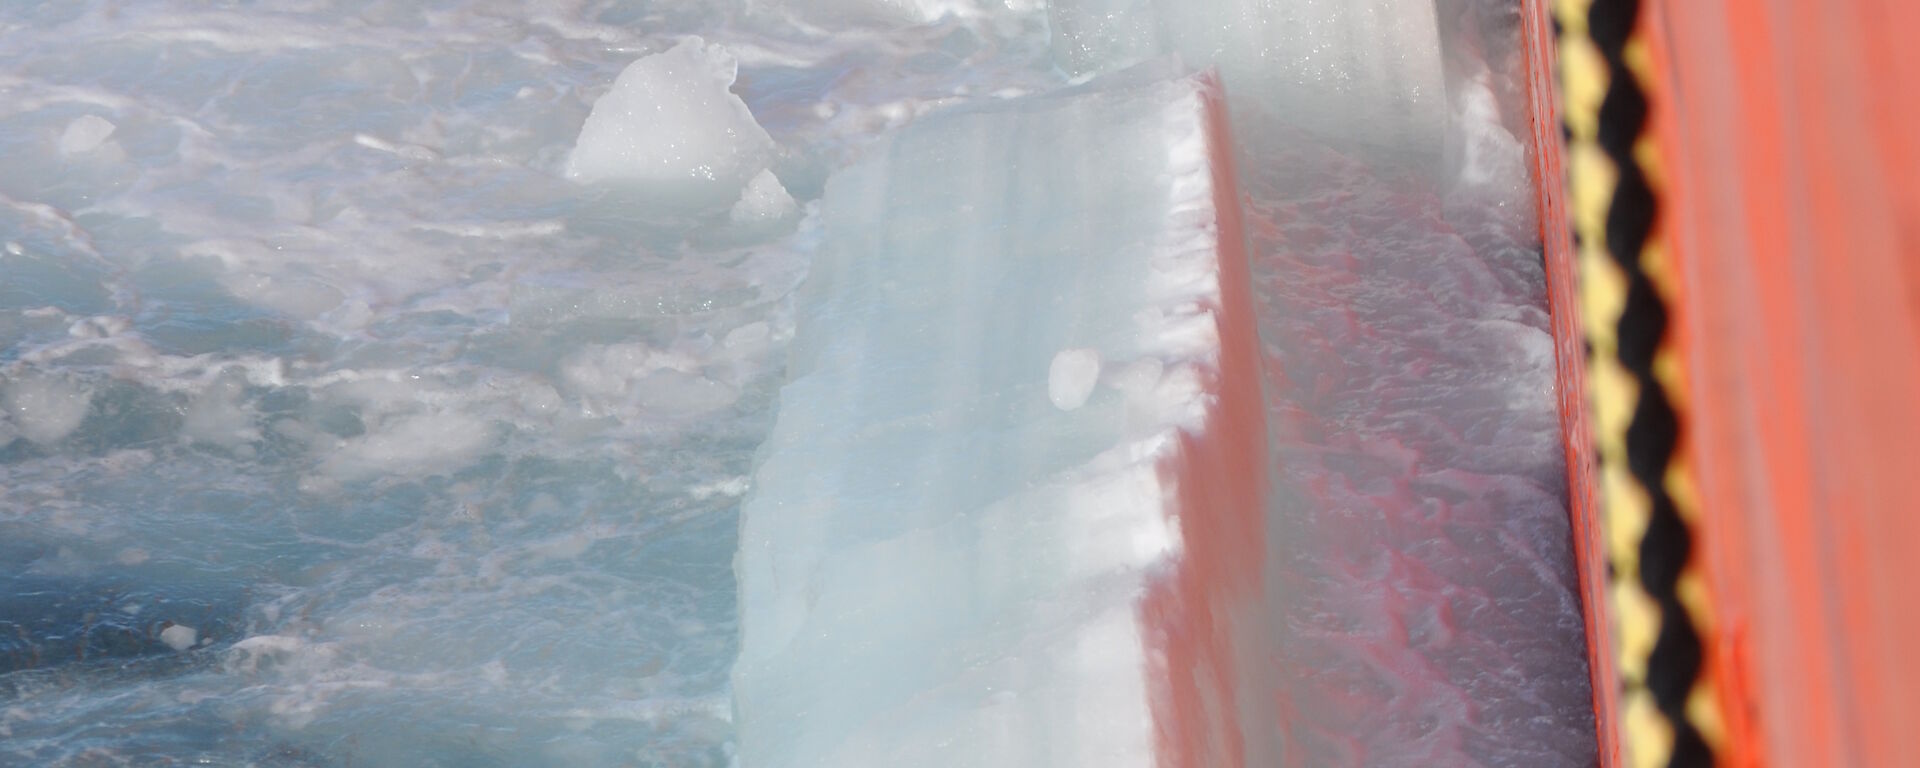 Side view of an orange ship, breaking through thick sea ice.